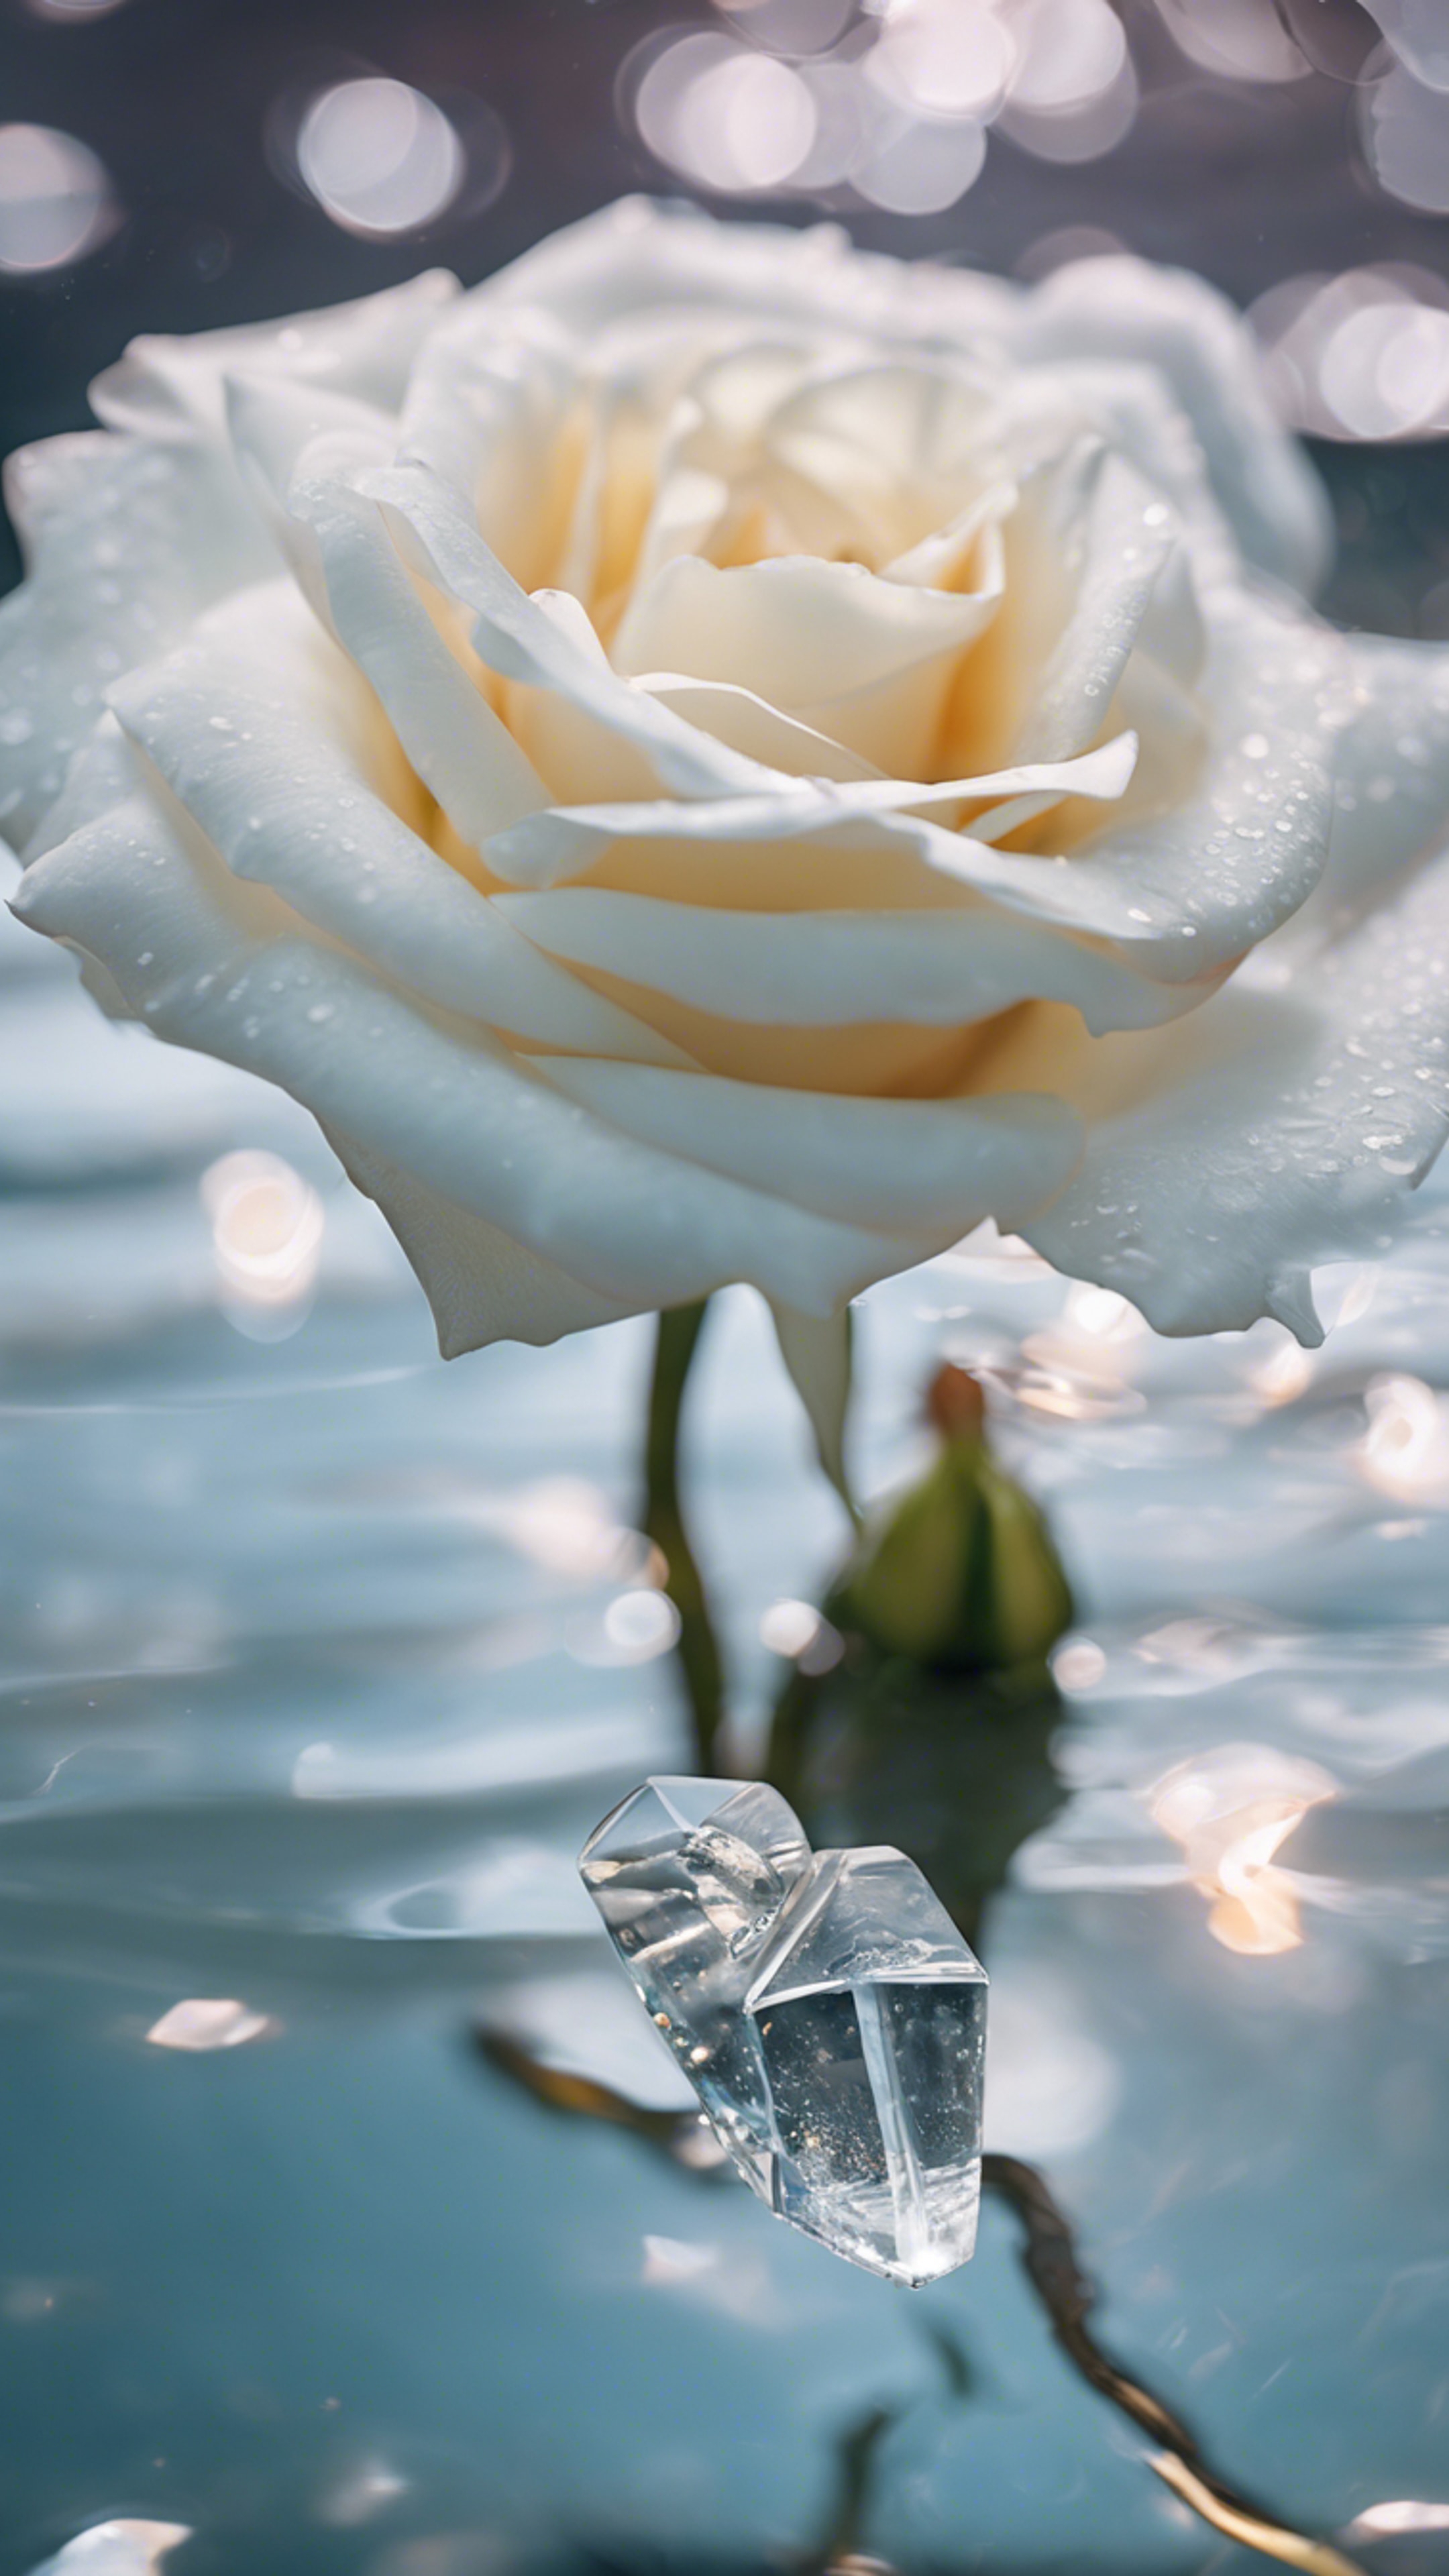 A white rose submerged in clear crystal water, petals gracefully spreading.壁紙[af81d3e8e21443b29805]